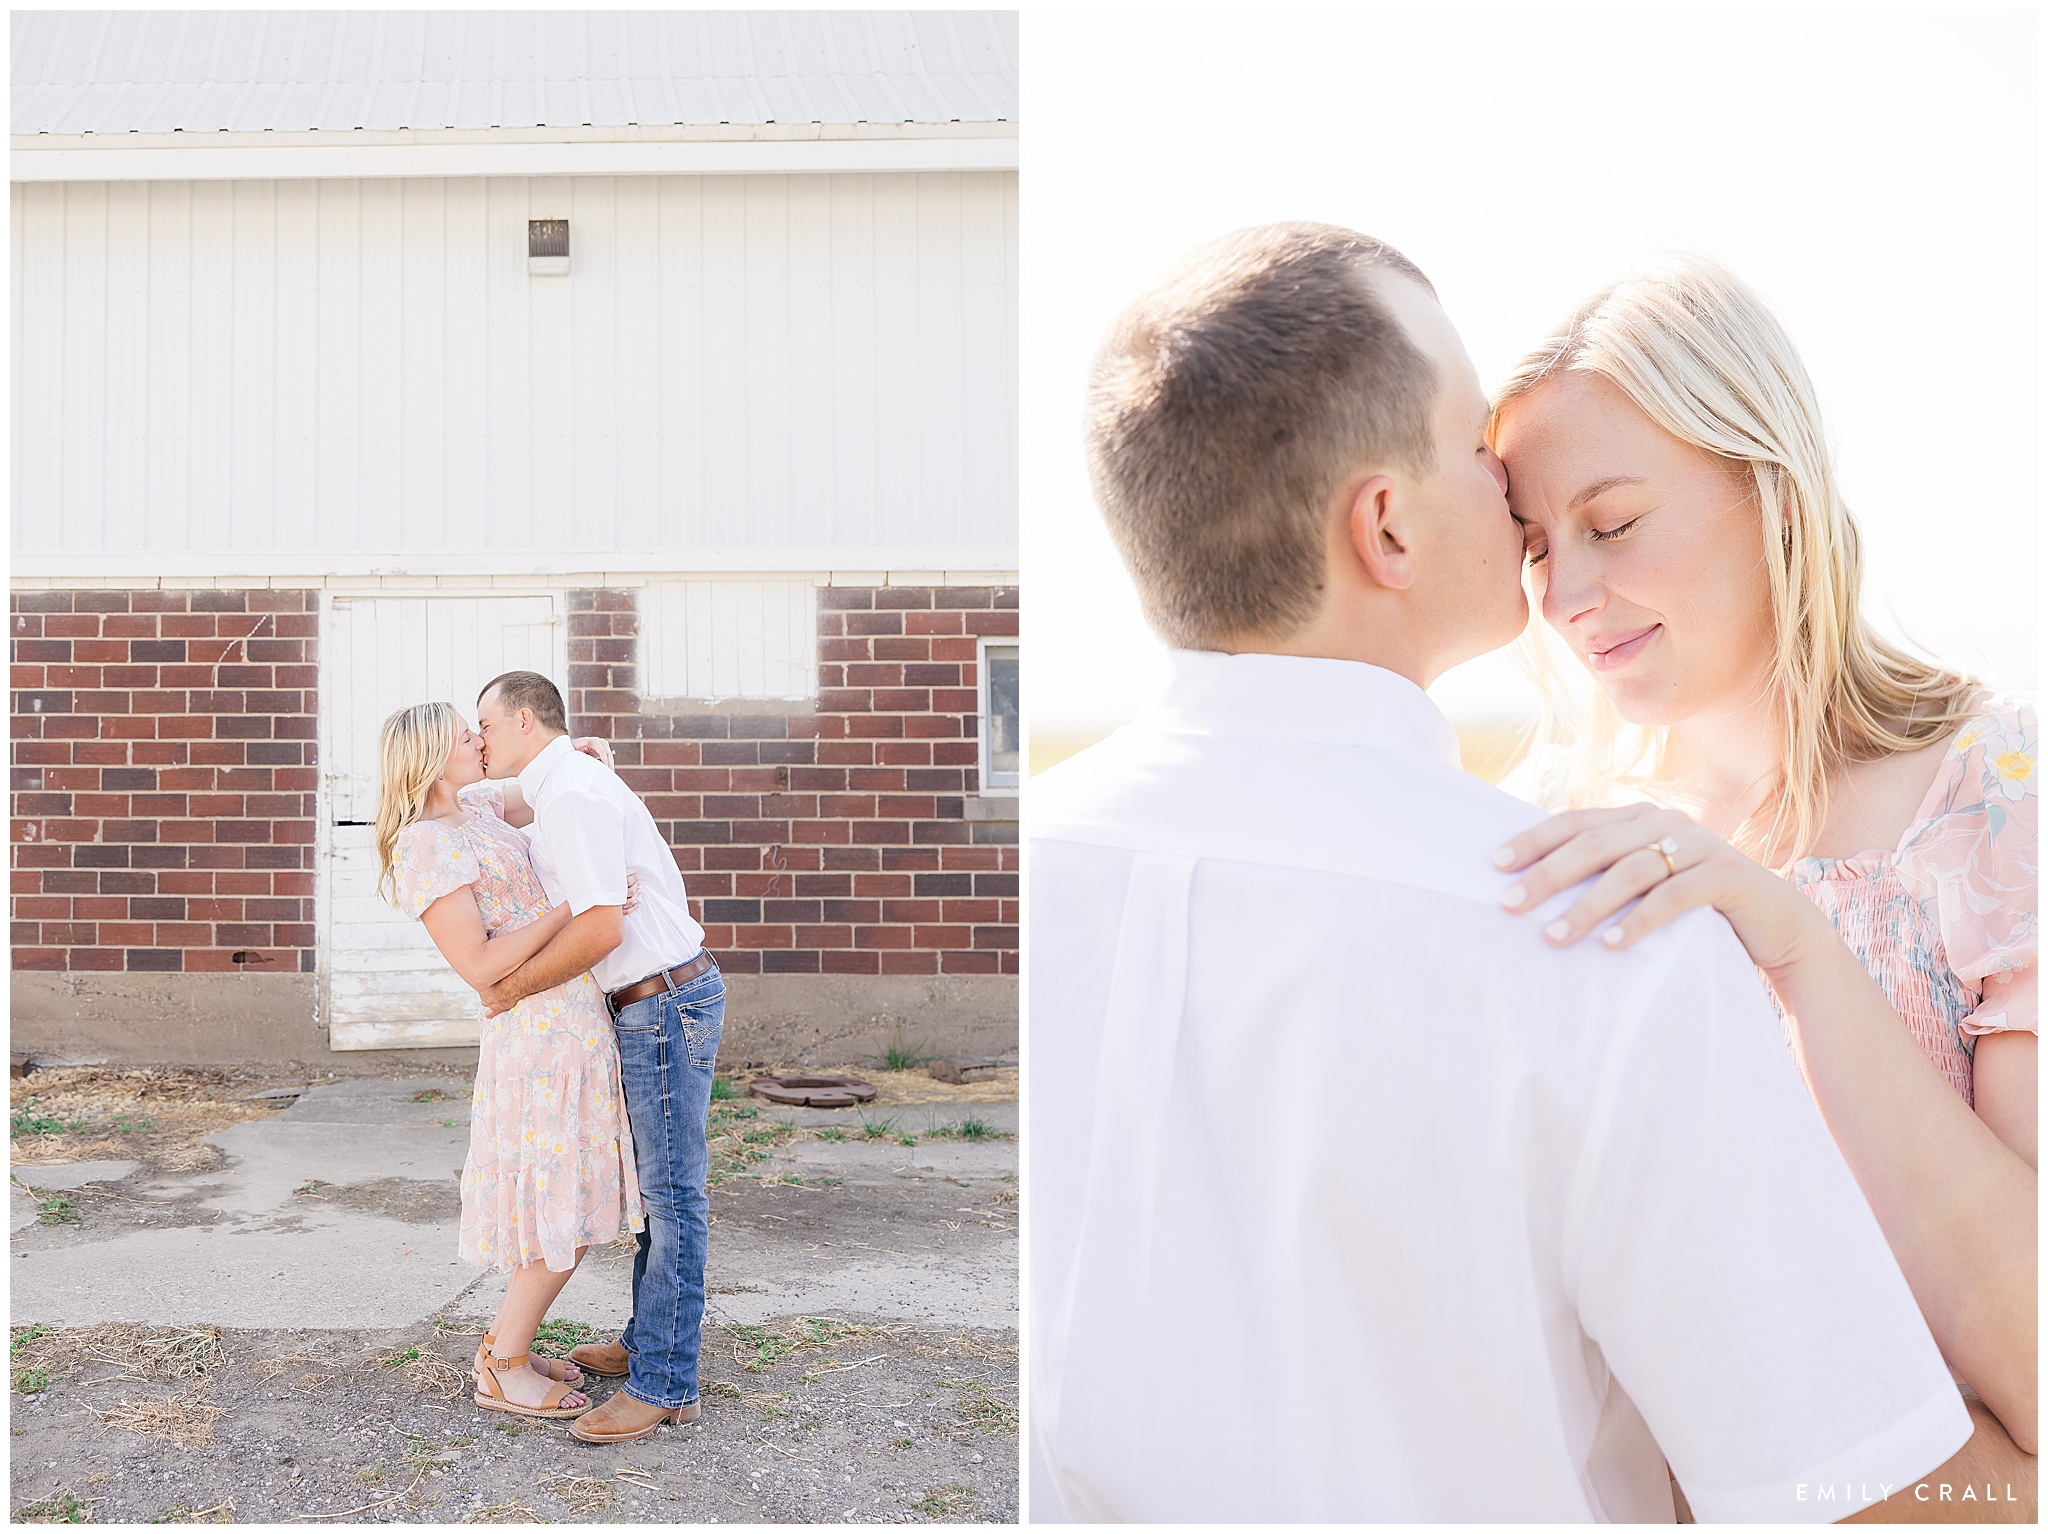 countryside_engagement_md_emilycrall_photo_1406.jpg